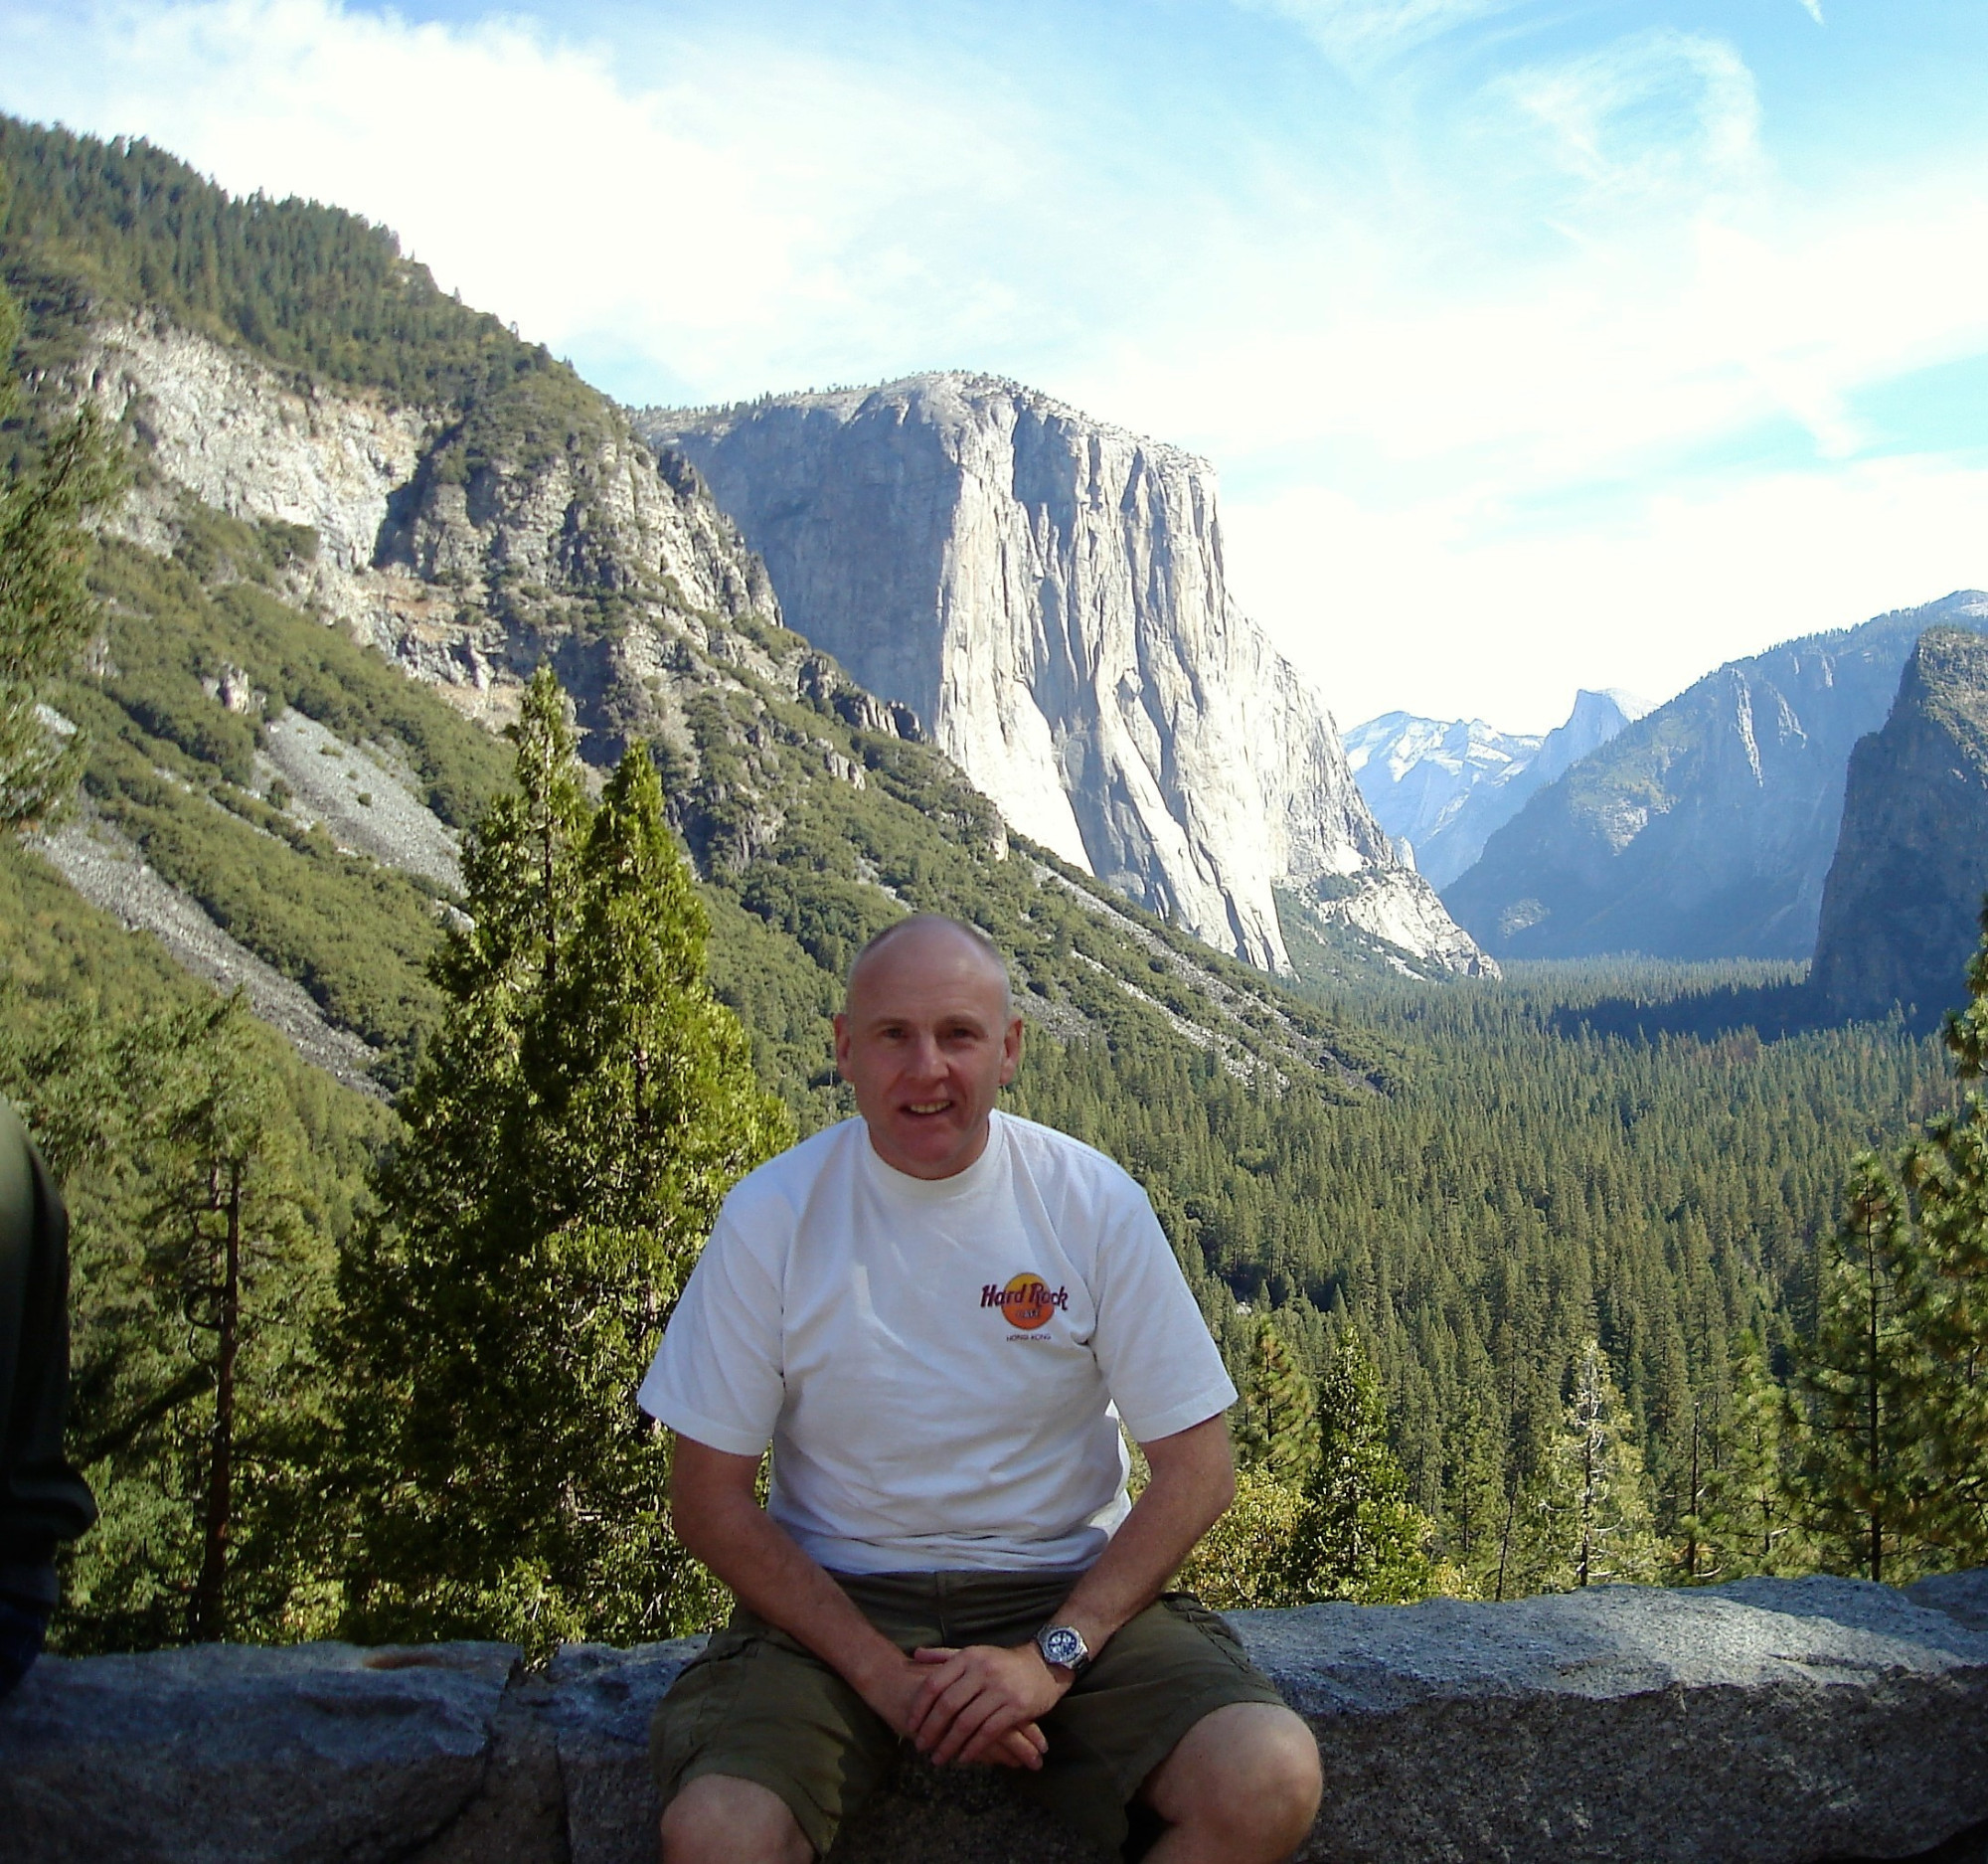 Moi with El Capitan in background